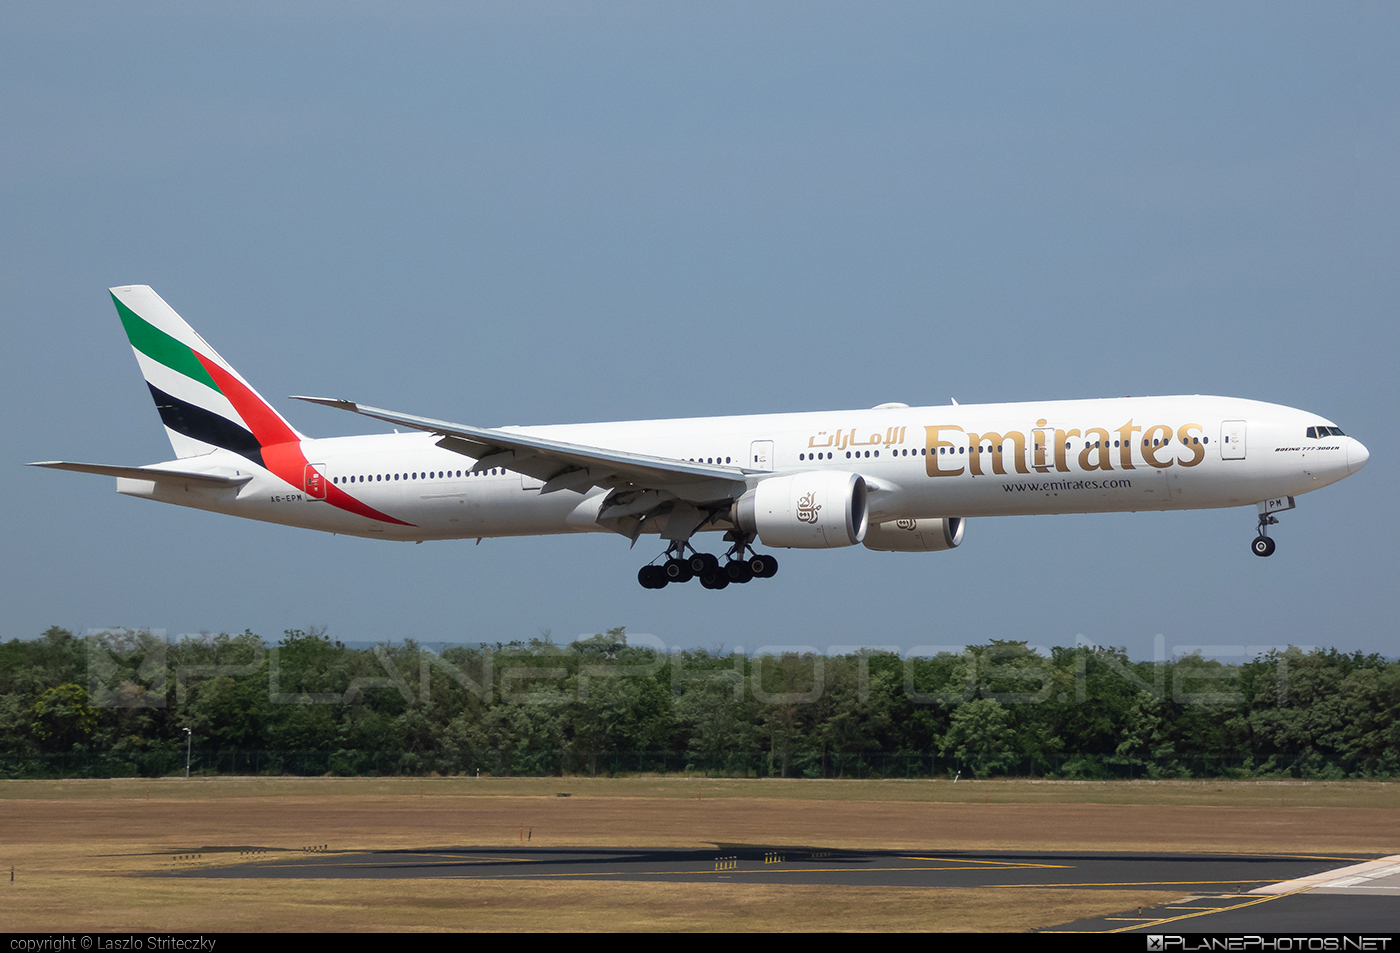 Boeing 777-300ER - A6-EPM operated by Emirates #FerencLisztIntl #b777 #b777er #boeing #boeing777 #emirates #tripleseven